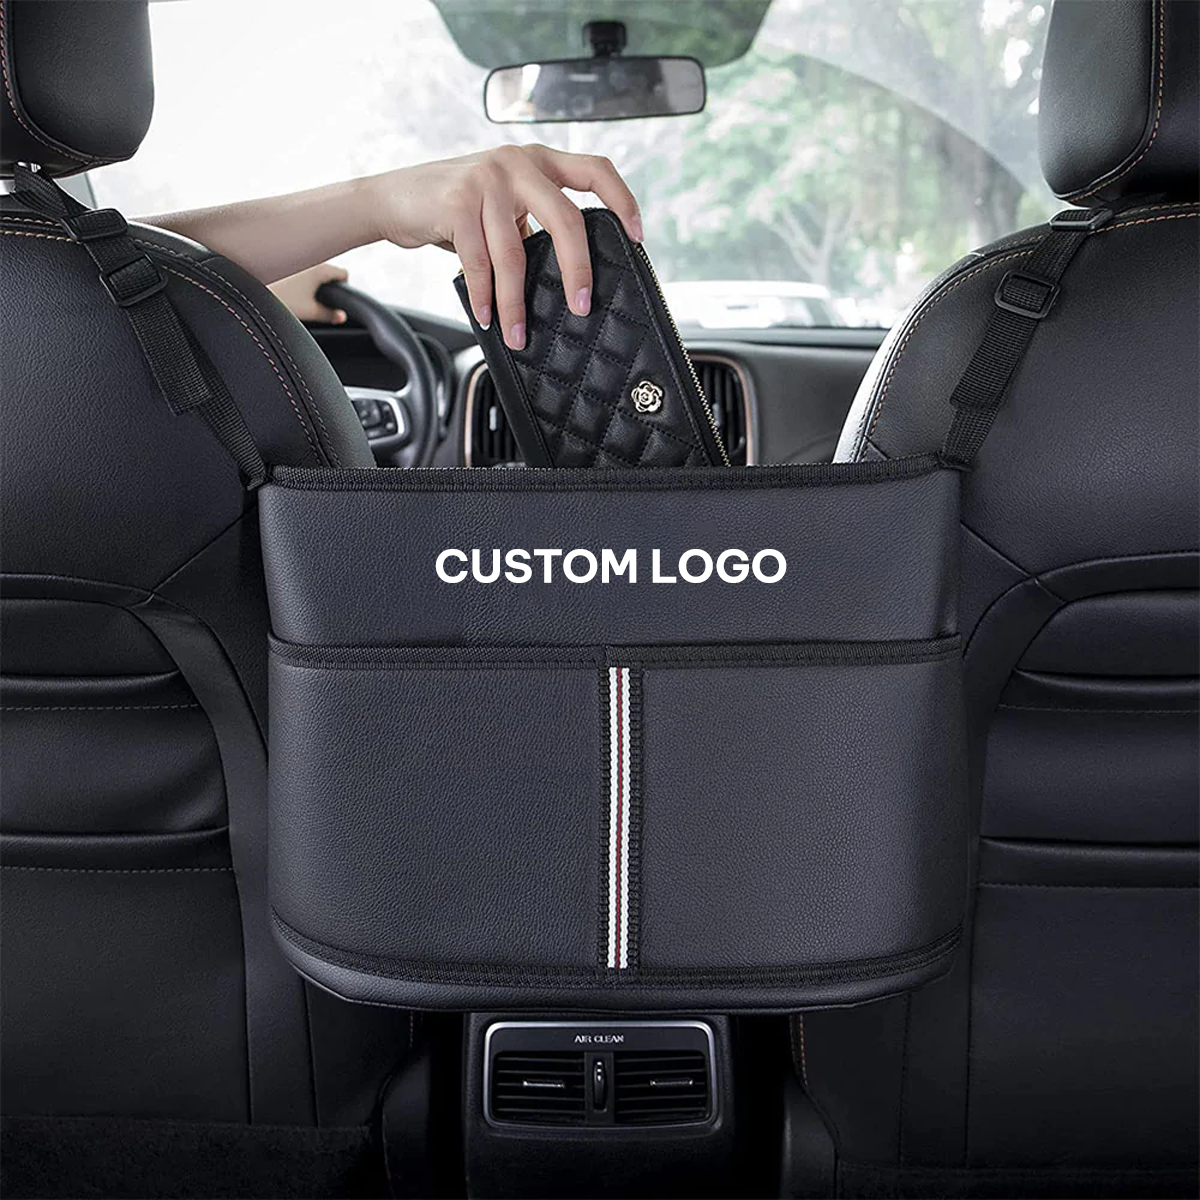 Custom Logo Car Purse Holder for Car, Fit with Cars, Handbag Holder Between Seats Premium PU Leather, Auto Driver Or Passenger Accessories Organizer, Hanging Car Purse Storage Pocket Back Seat Pet Barrier